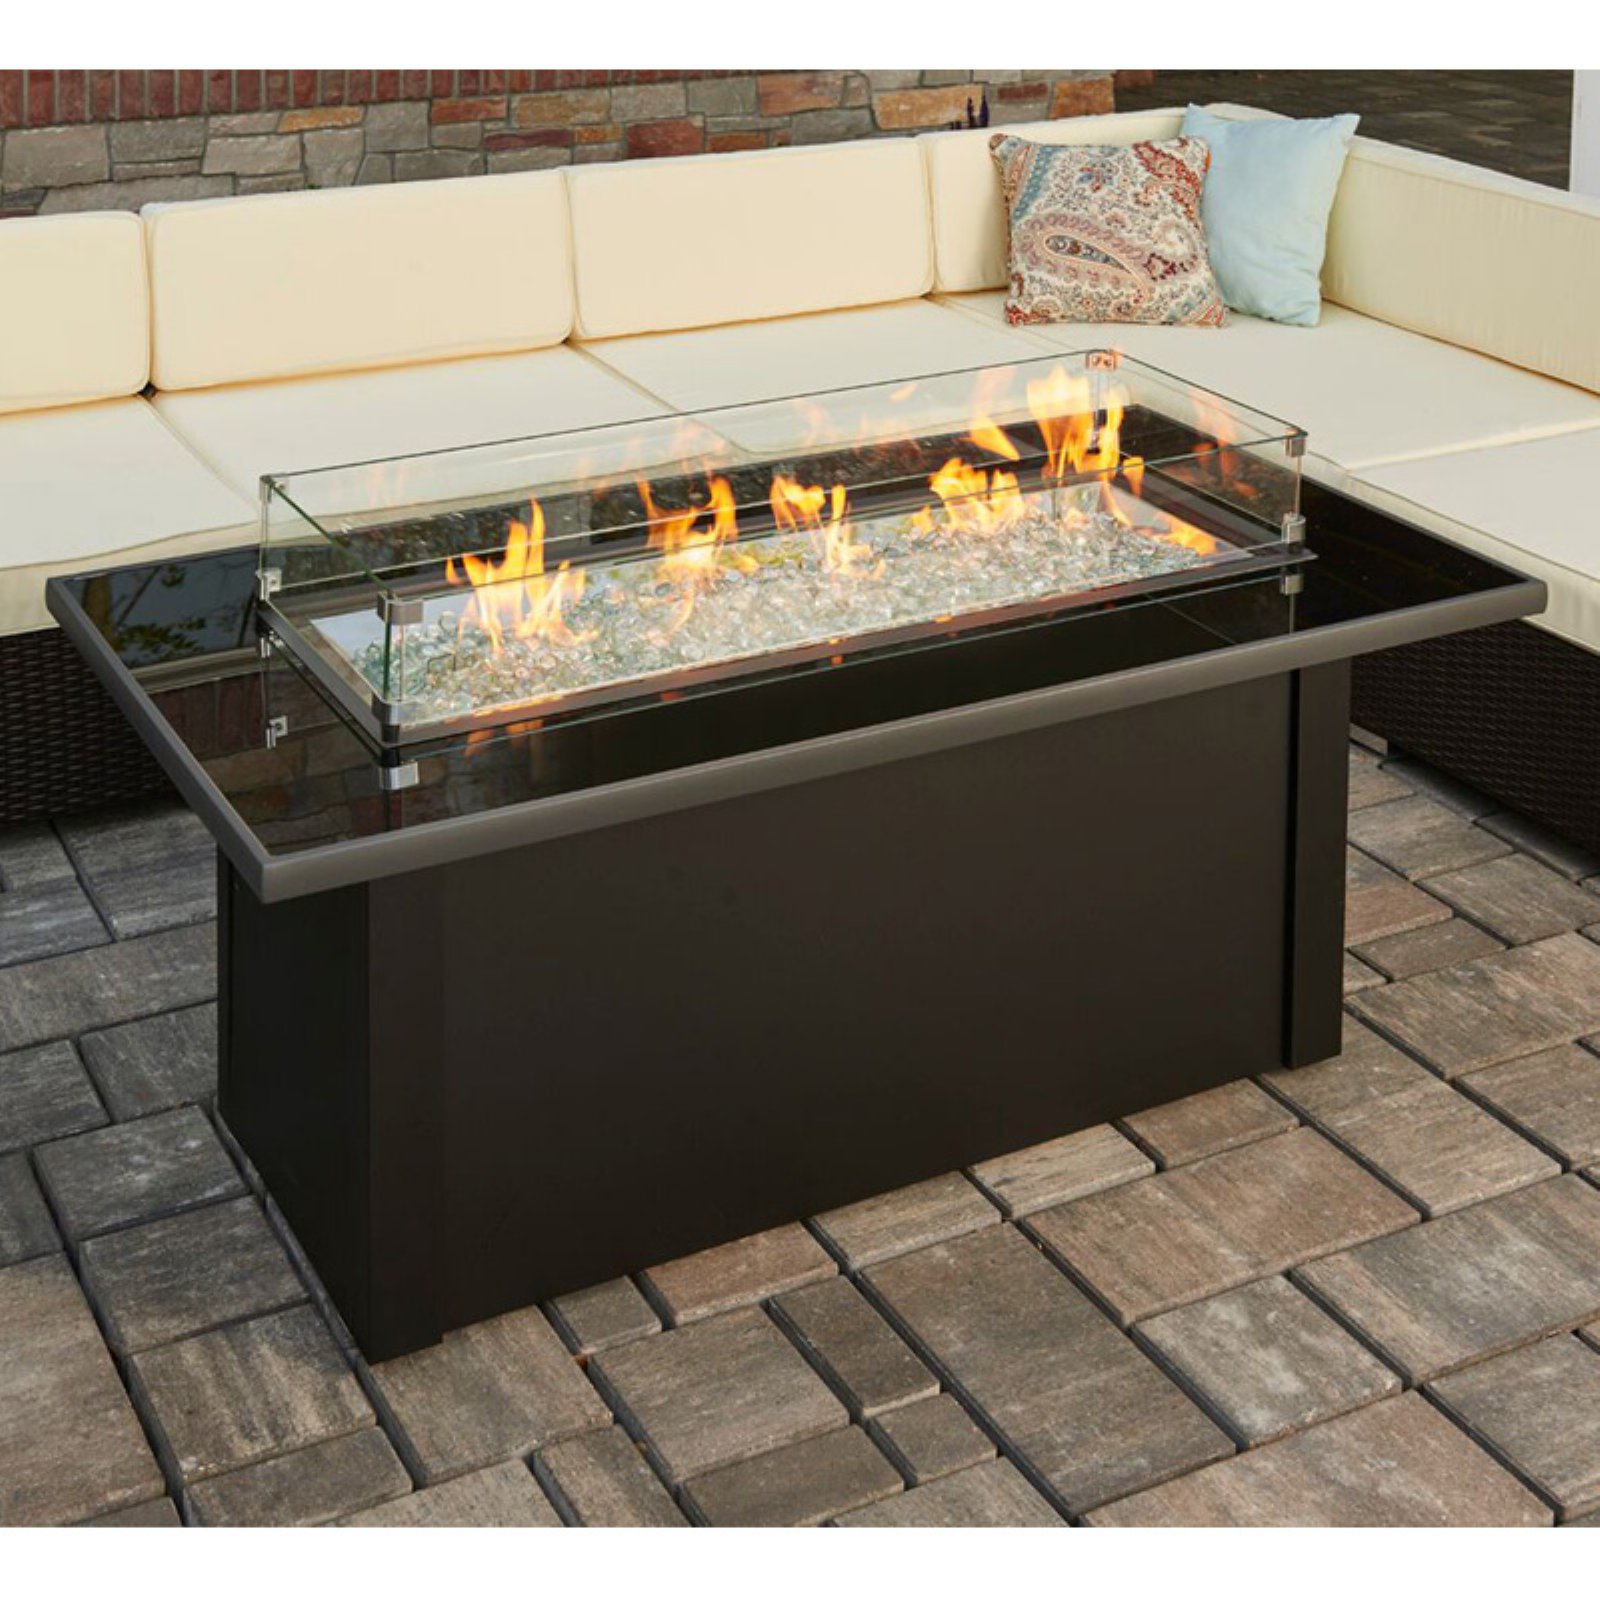 Bello Digital Fireplace Fresh Outdoor Greatroom Monte Carlo 59 3 In Fire Table with Free Cover